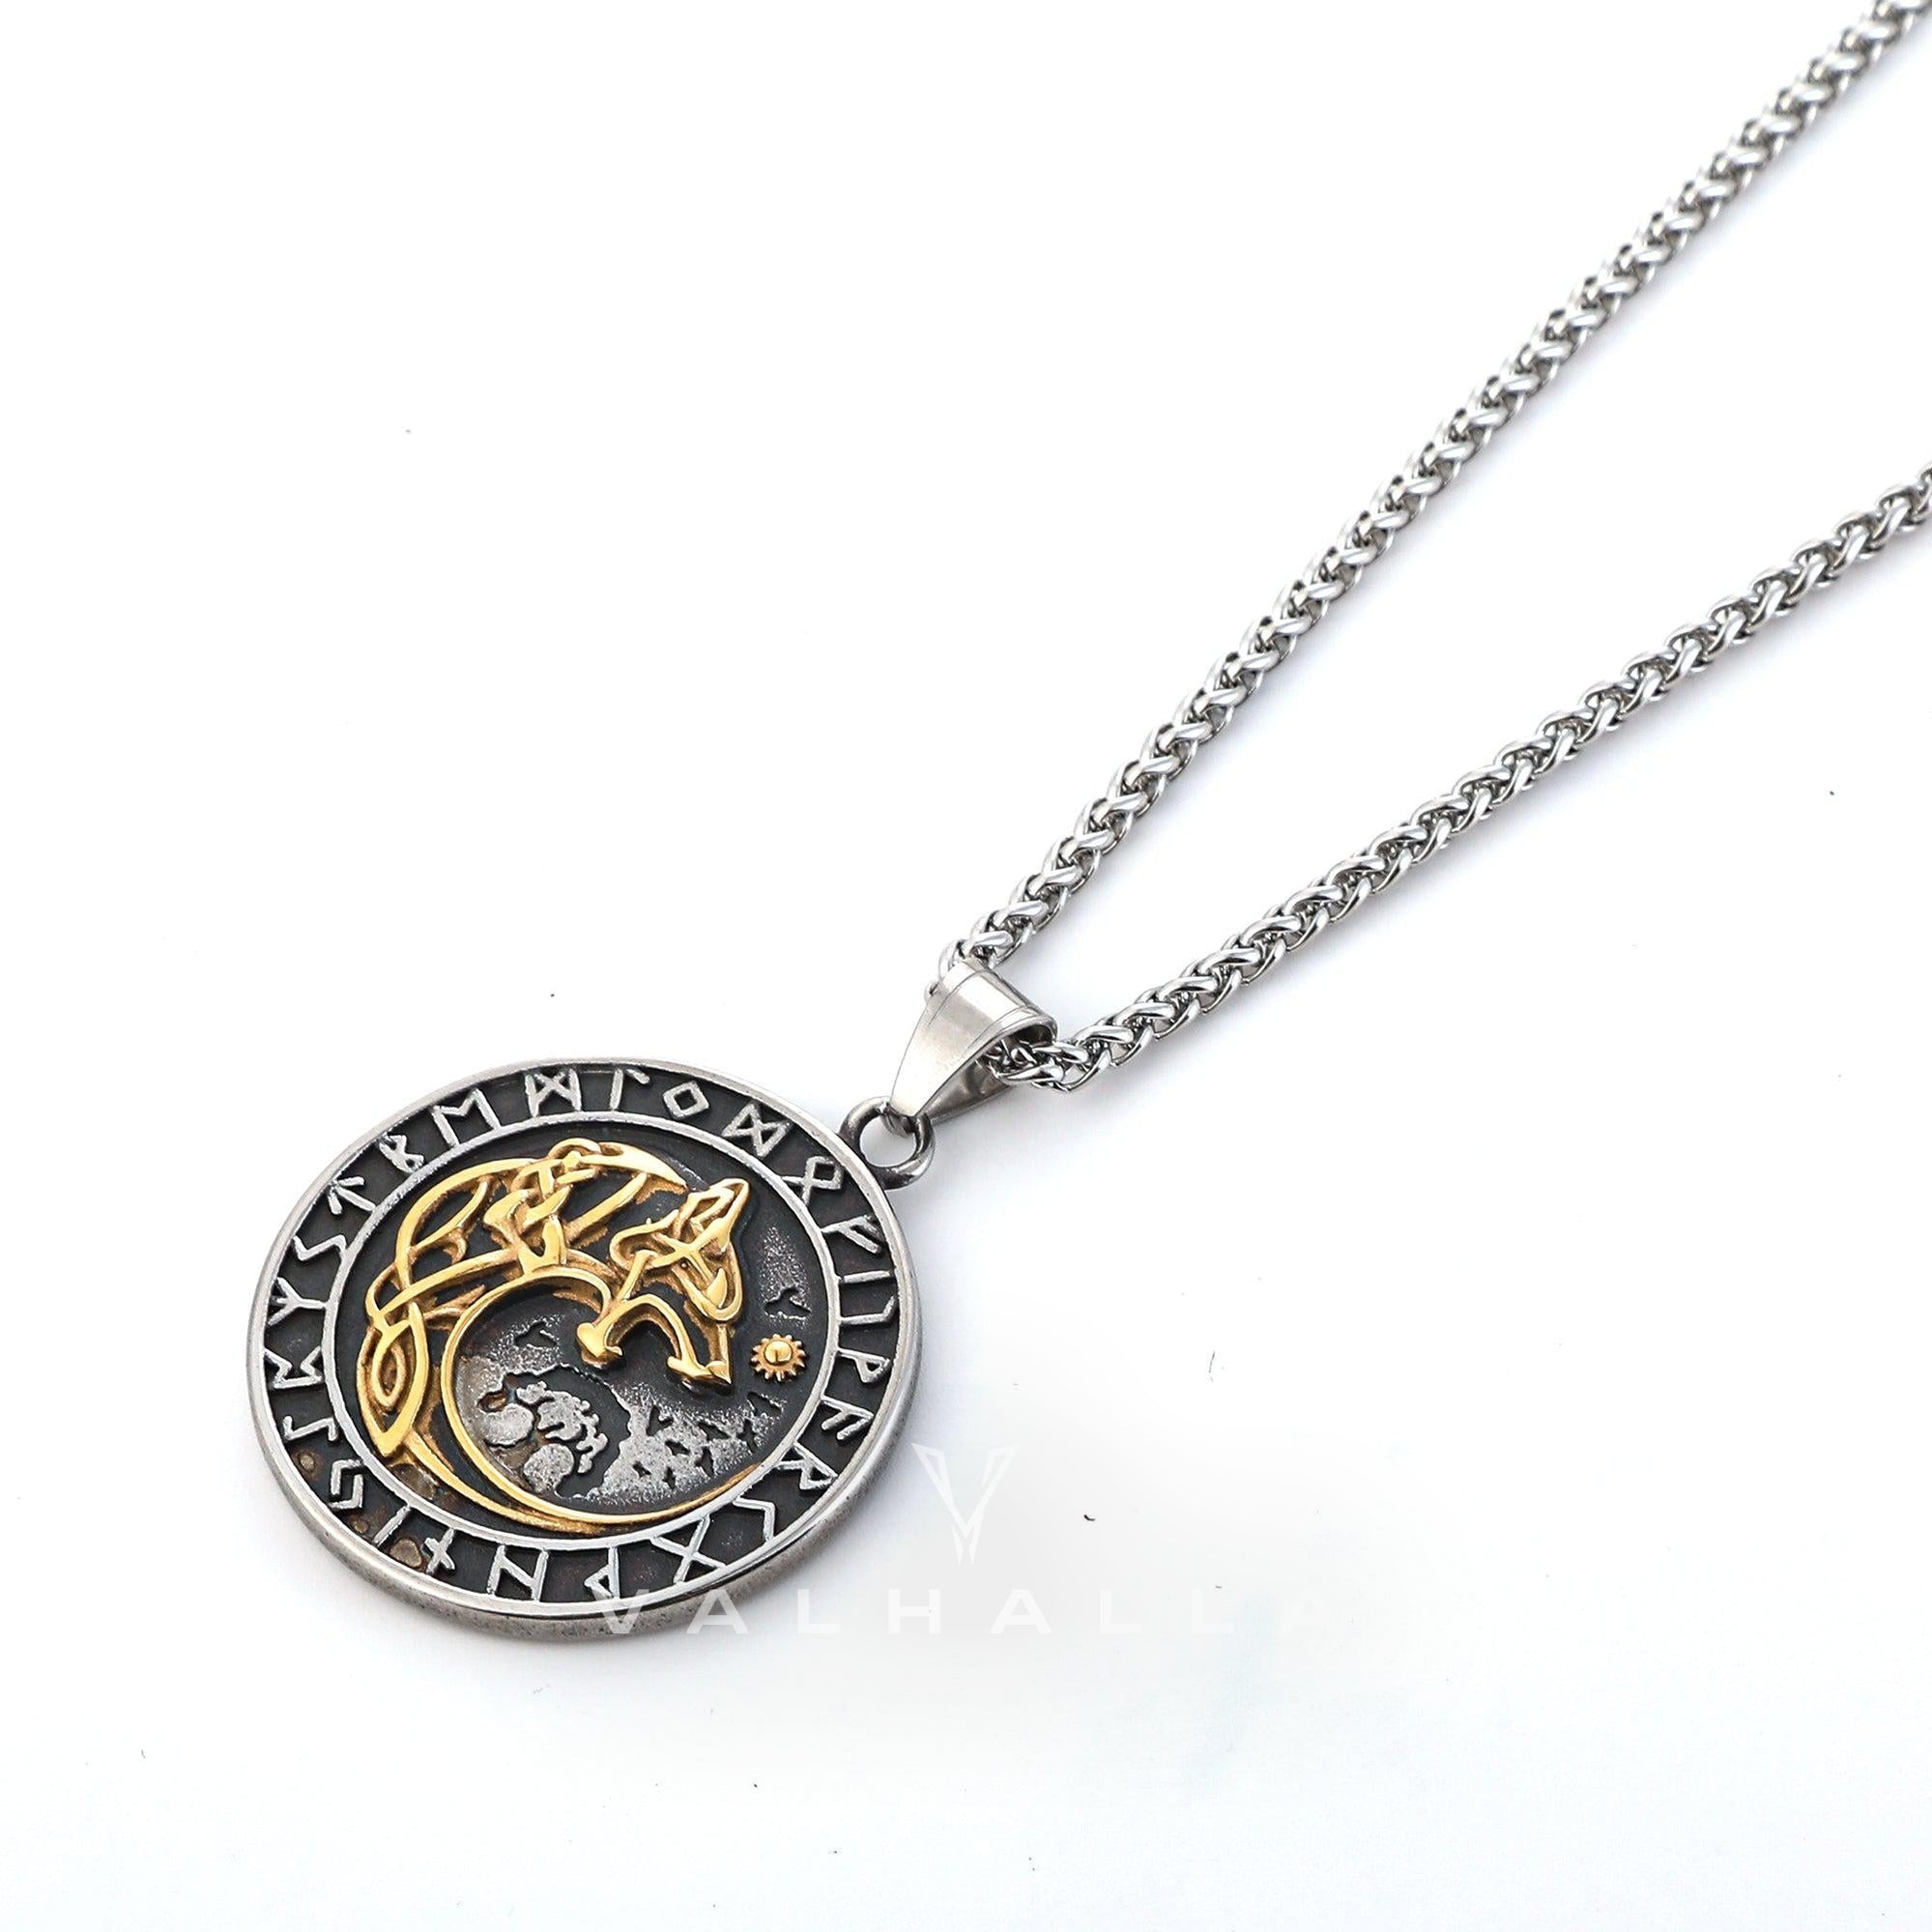 Dual Colored Handcrafted Stainless Steel Circular Fenrir Necklace